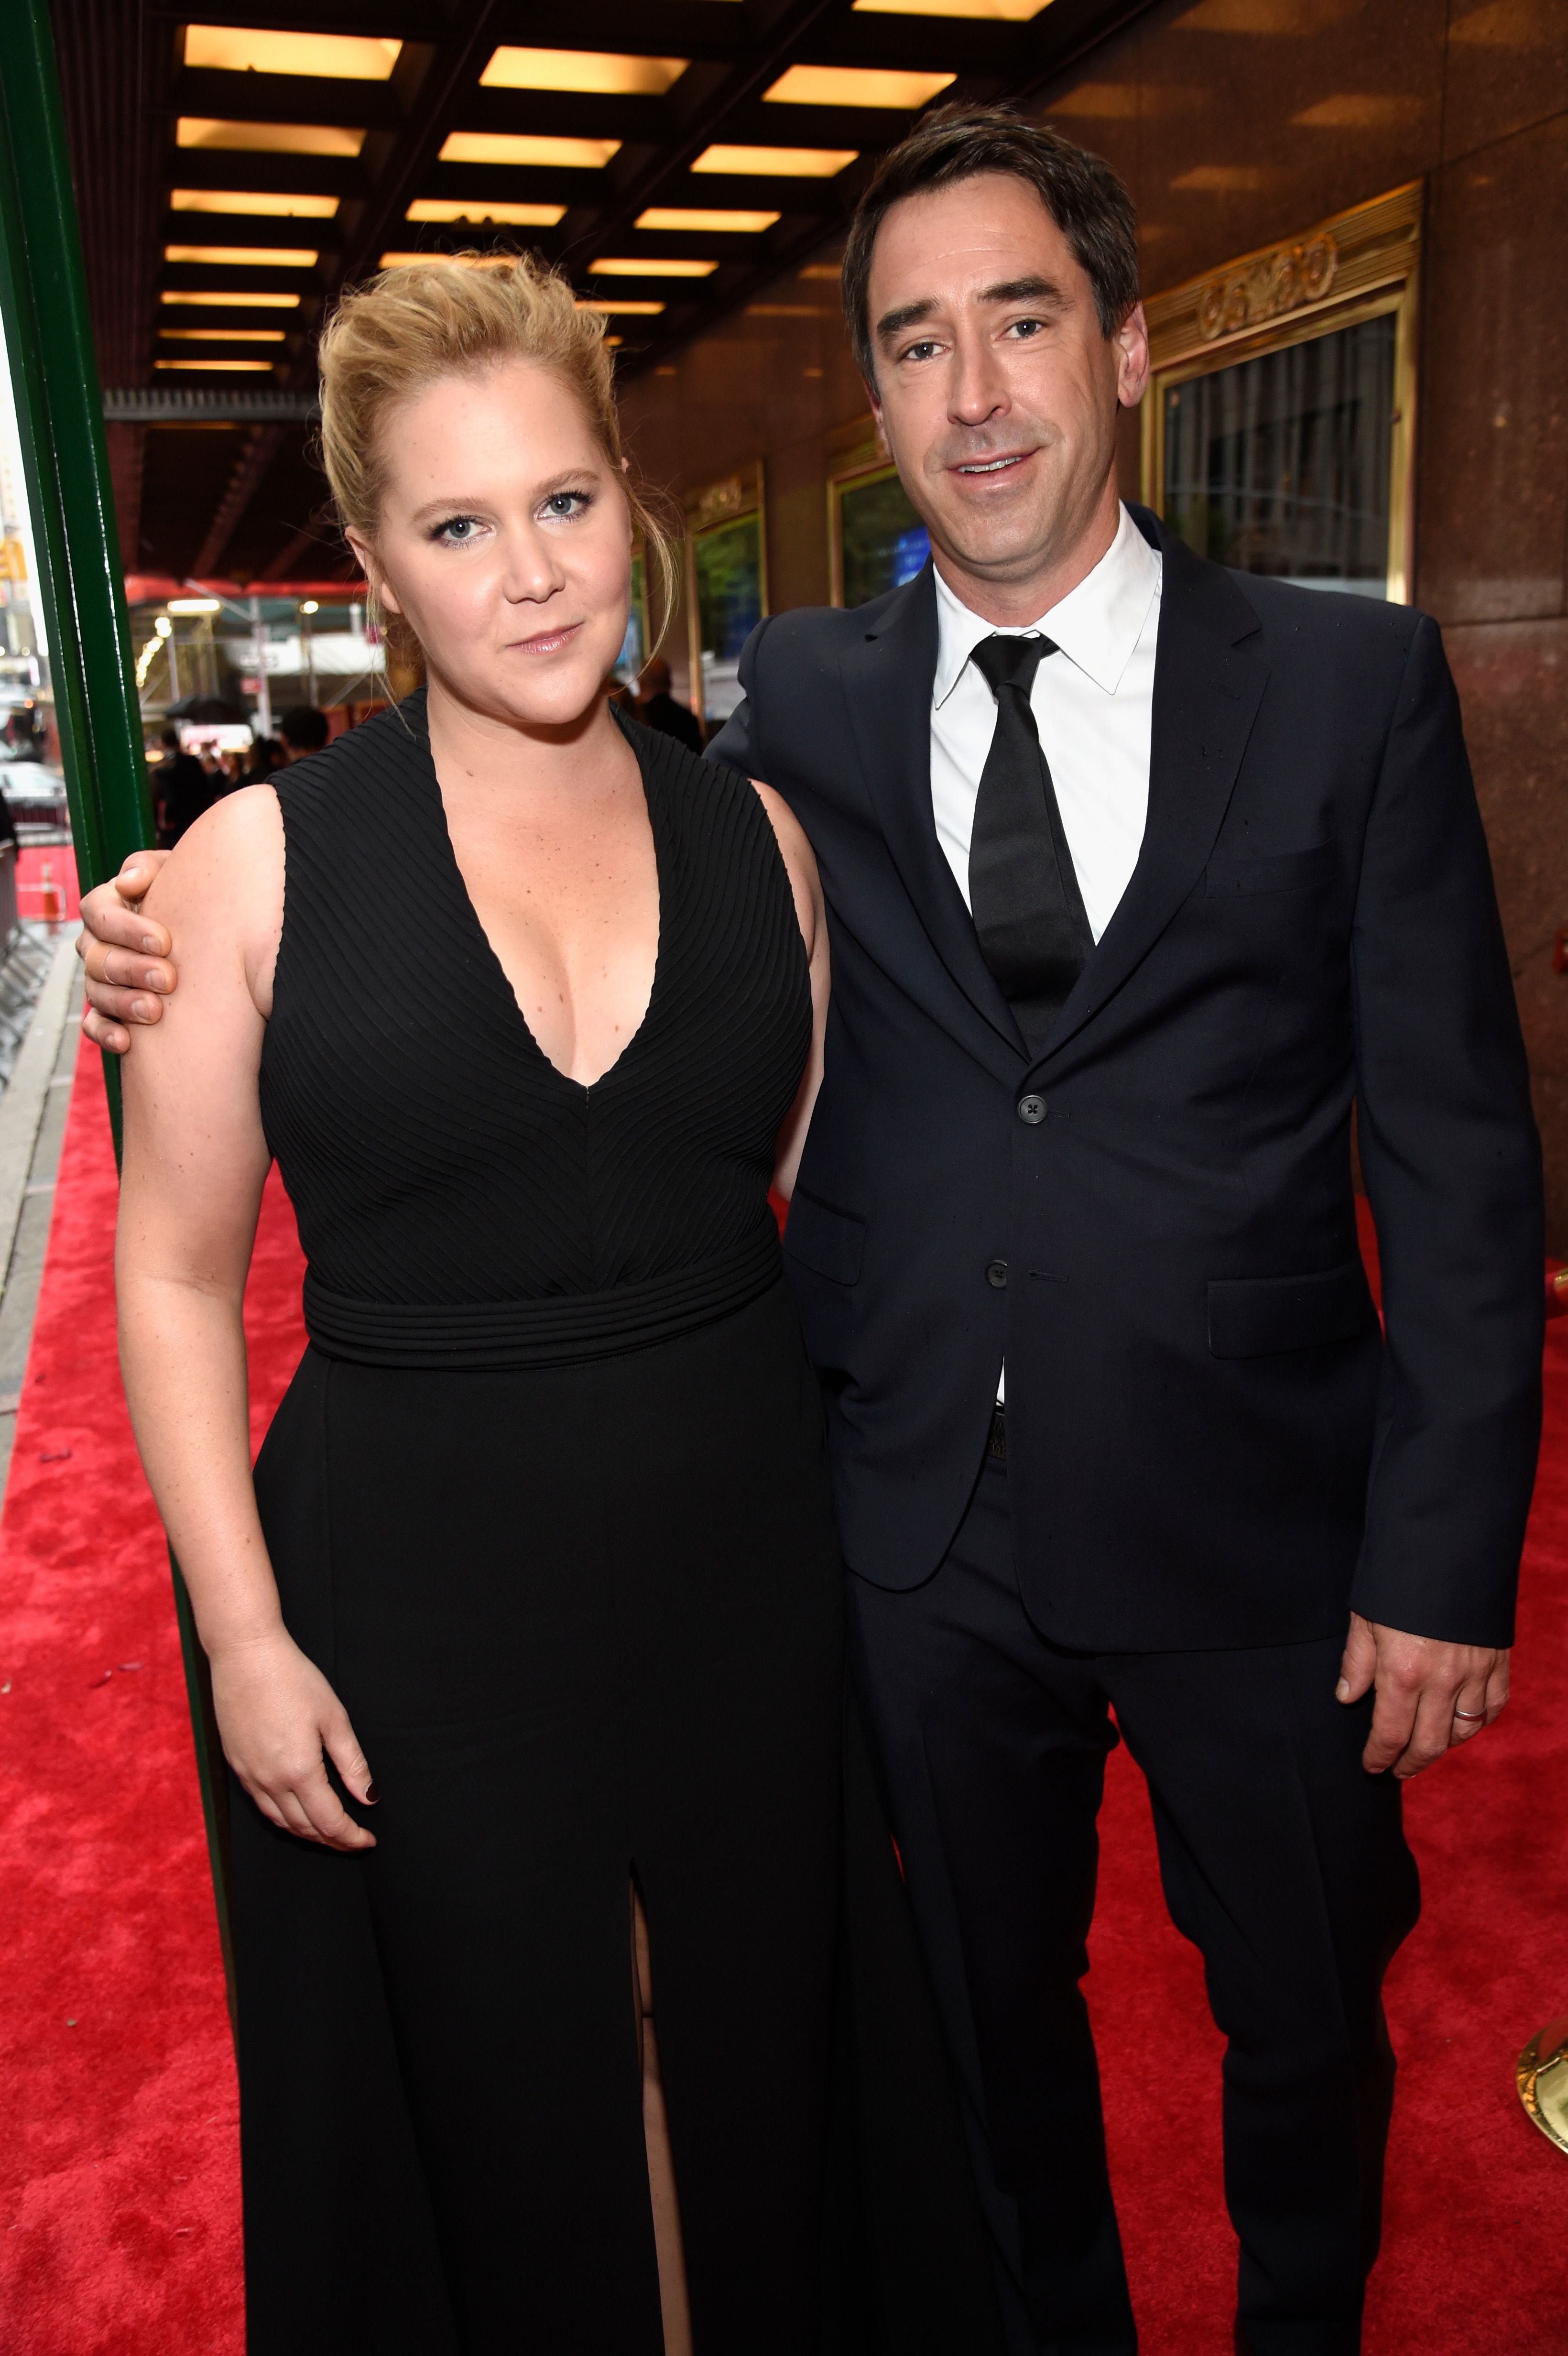 Amy Schumer and Chris Fischer at the 72nd Annual Tony Awards on June 10, 2018, in New York City | Photo: Kevin Mazur/Getty Images